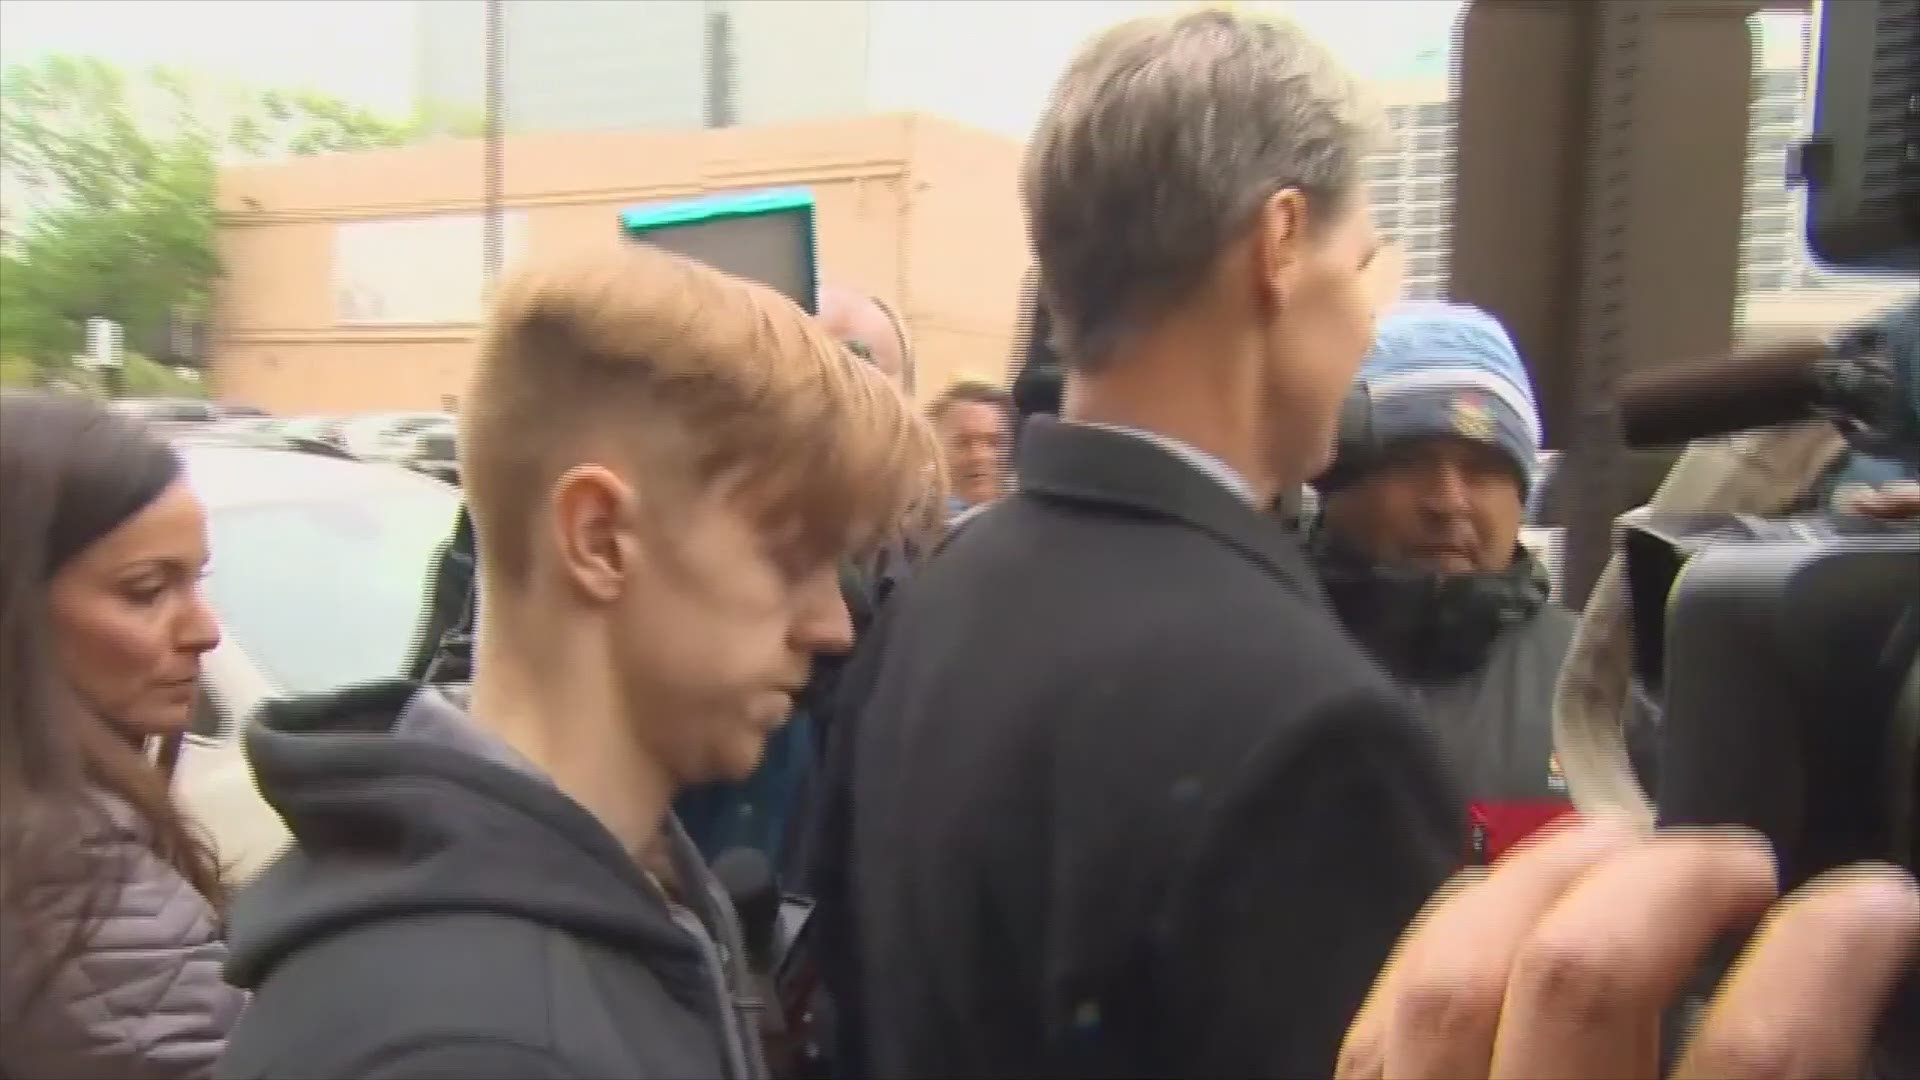 Ethan Couch is released from the Tarrant County probation office after serving 180 days in jail as a condition of his probation for a 2013 drunk driving crash that killed four people.